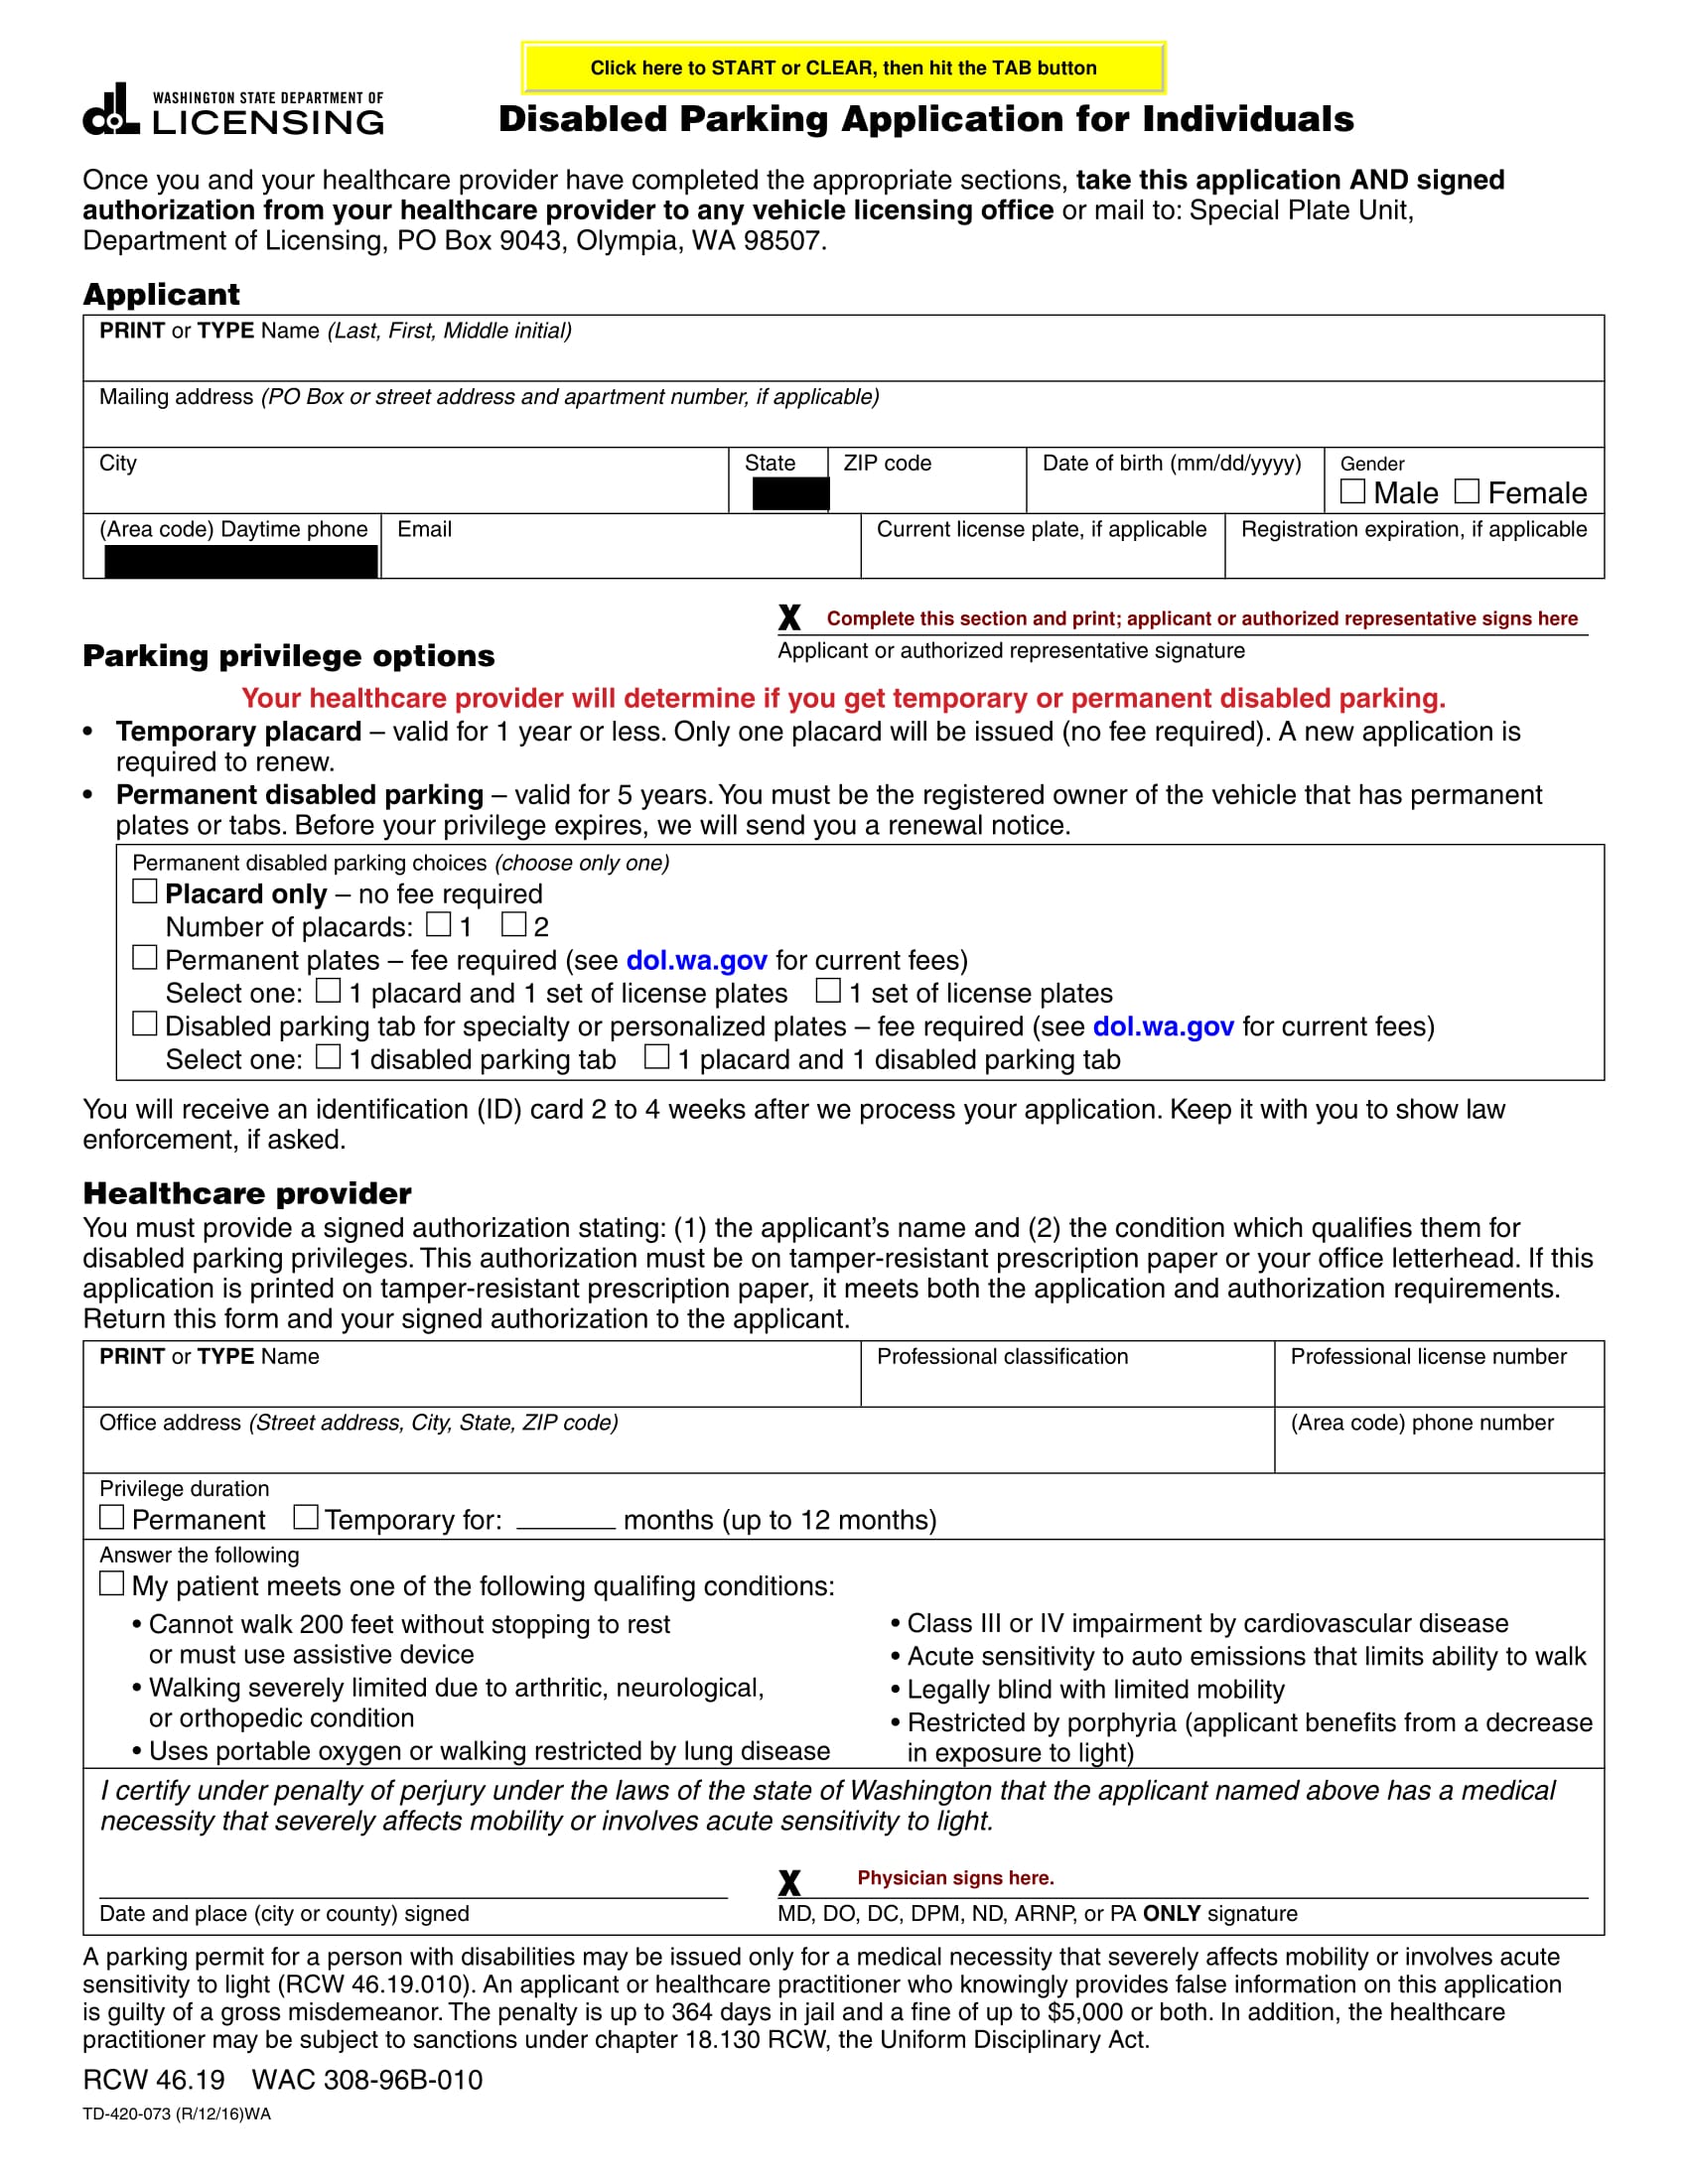 disability parking application form 1